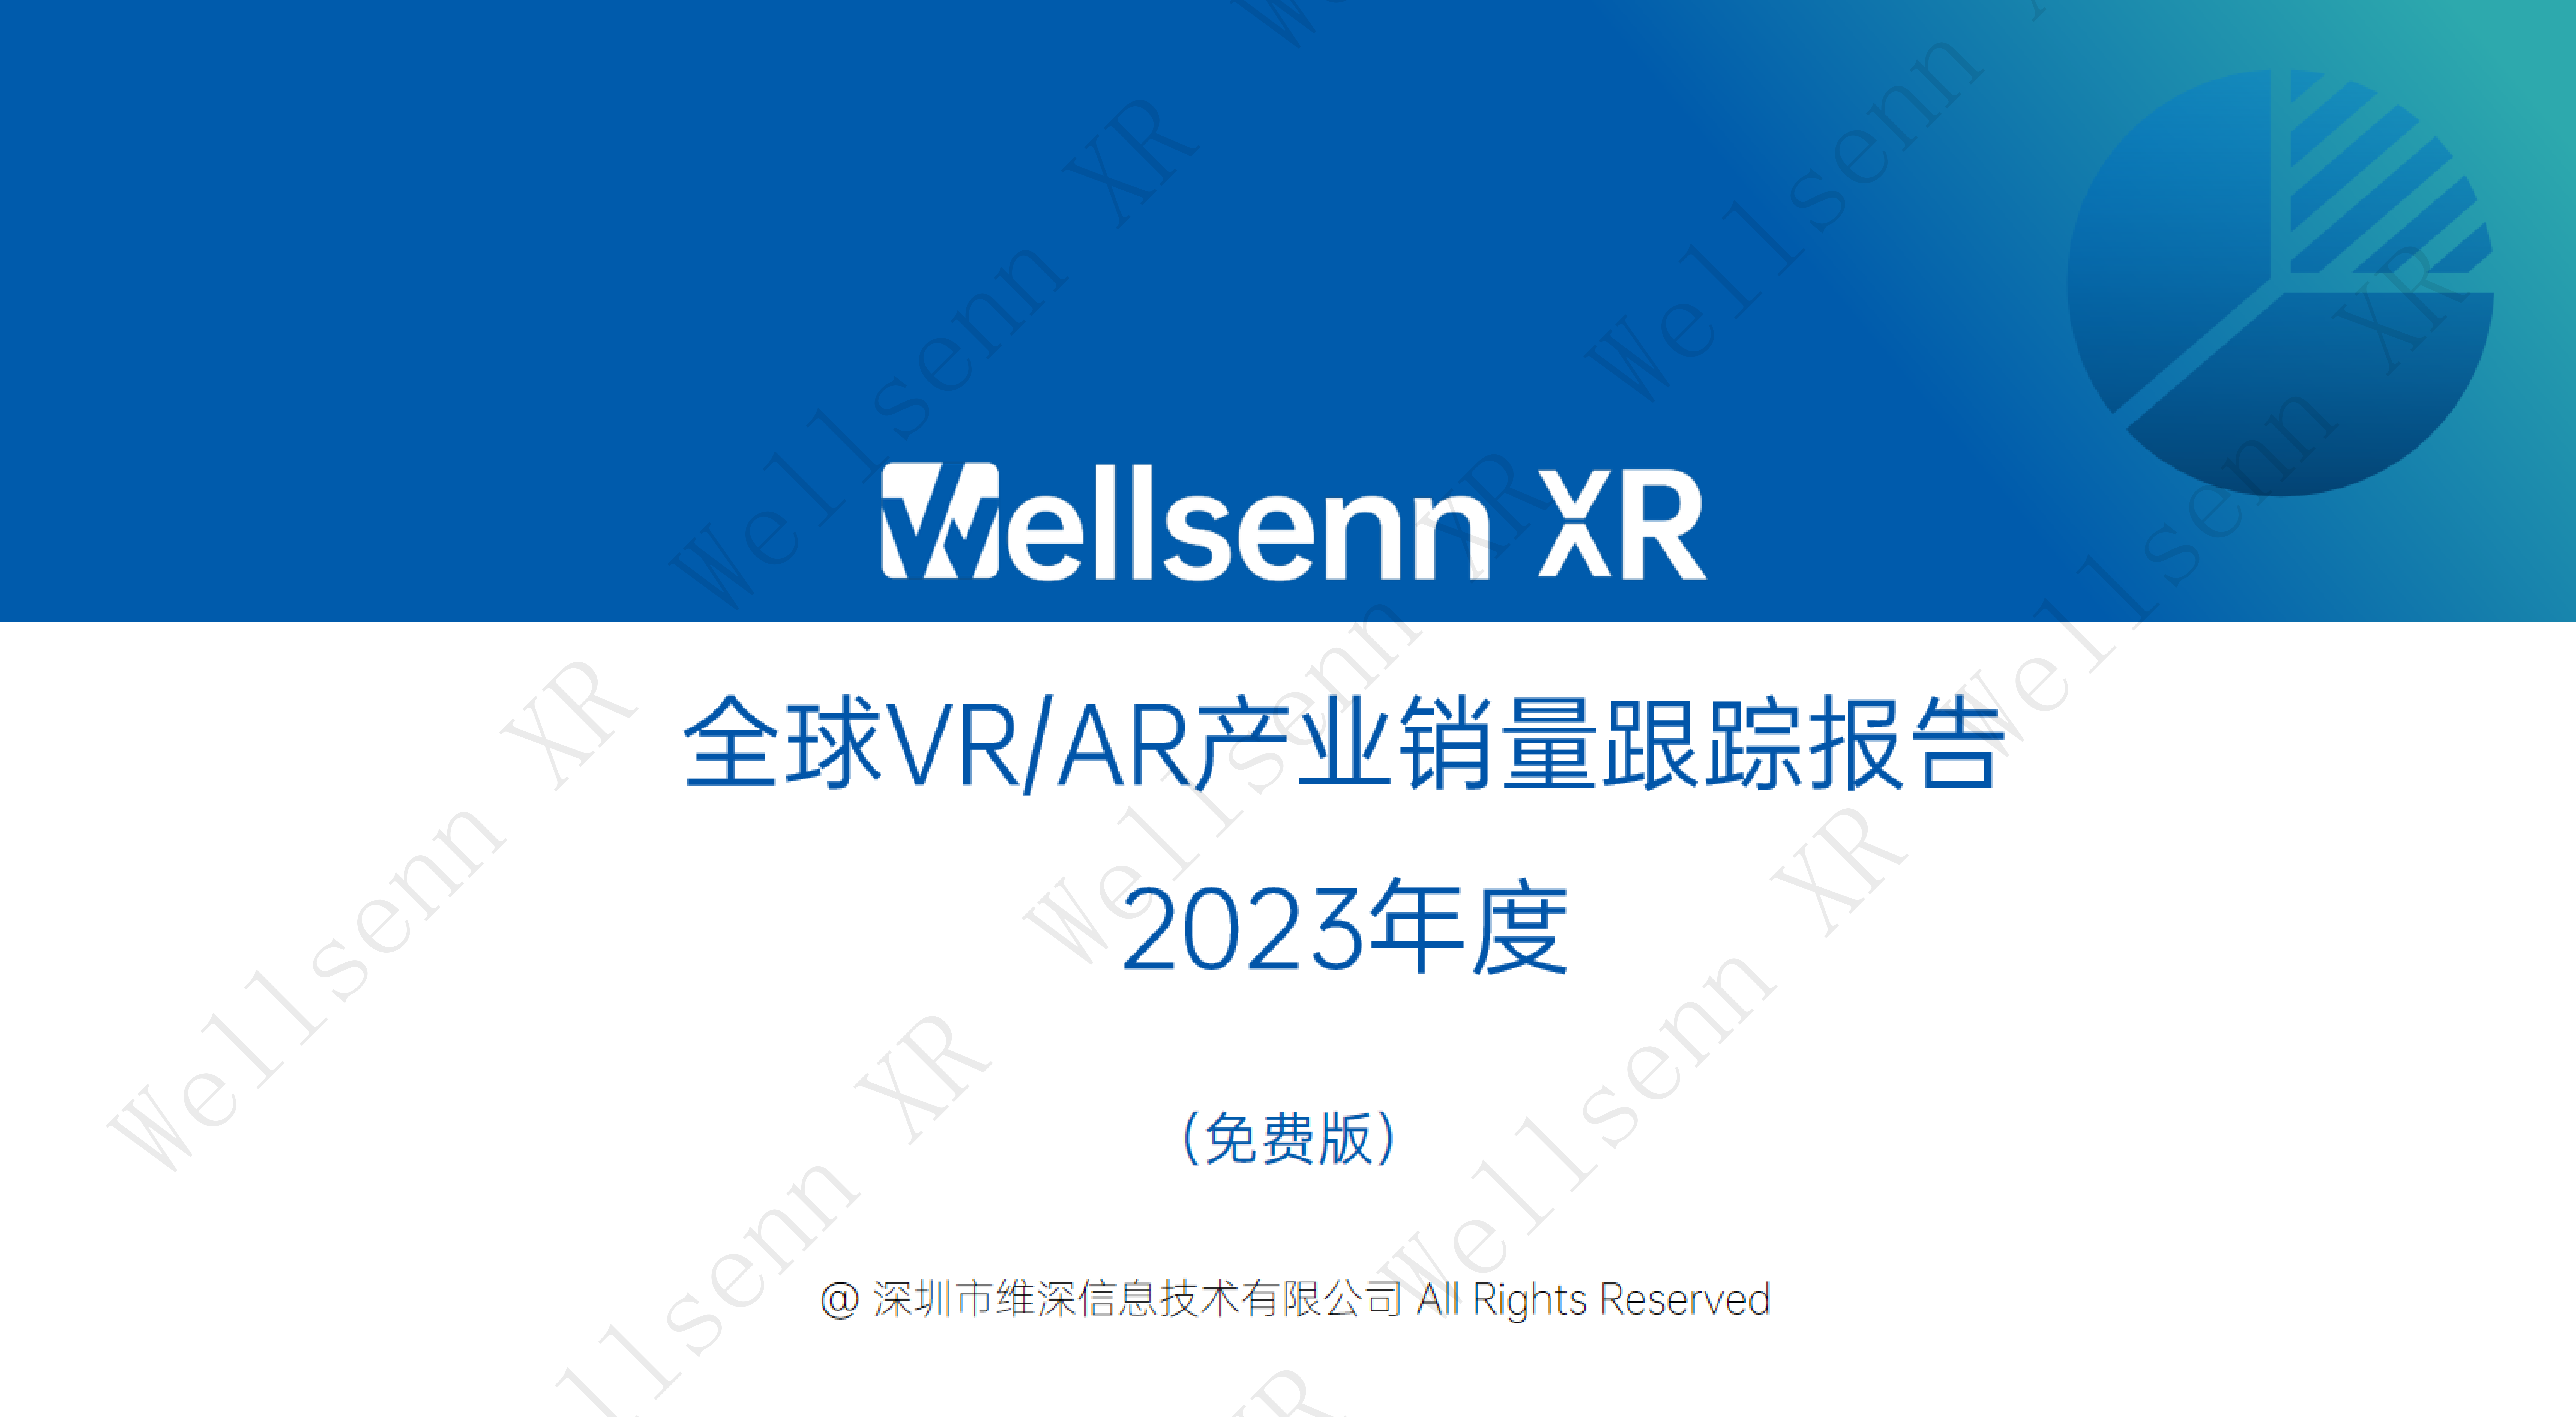 VR/AR Industry Shipment Tracking report for 2023